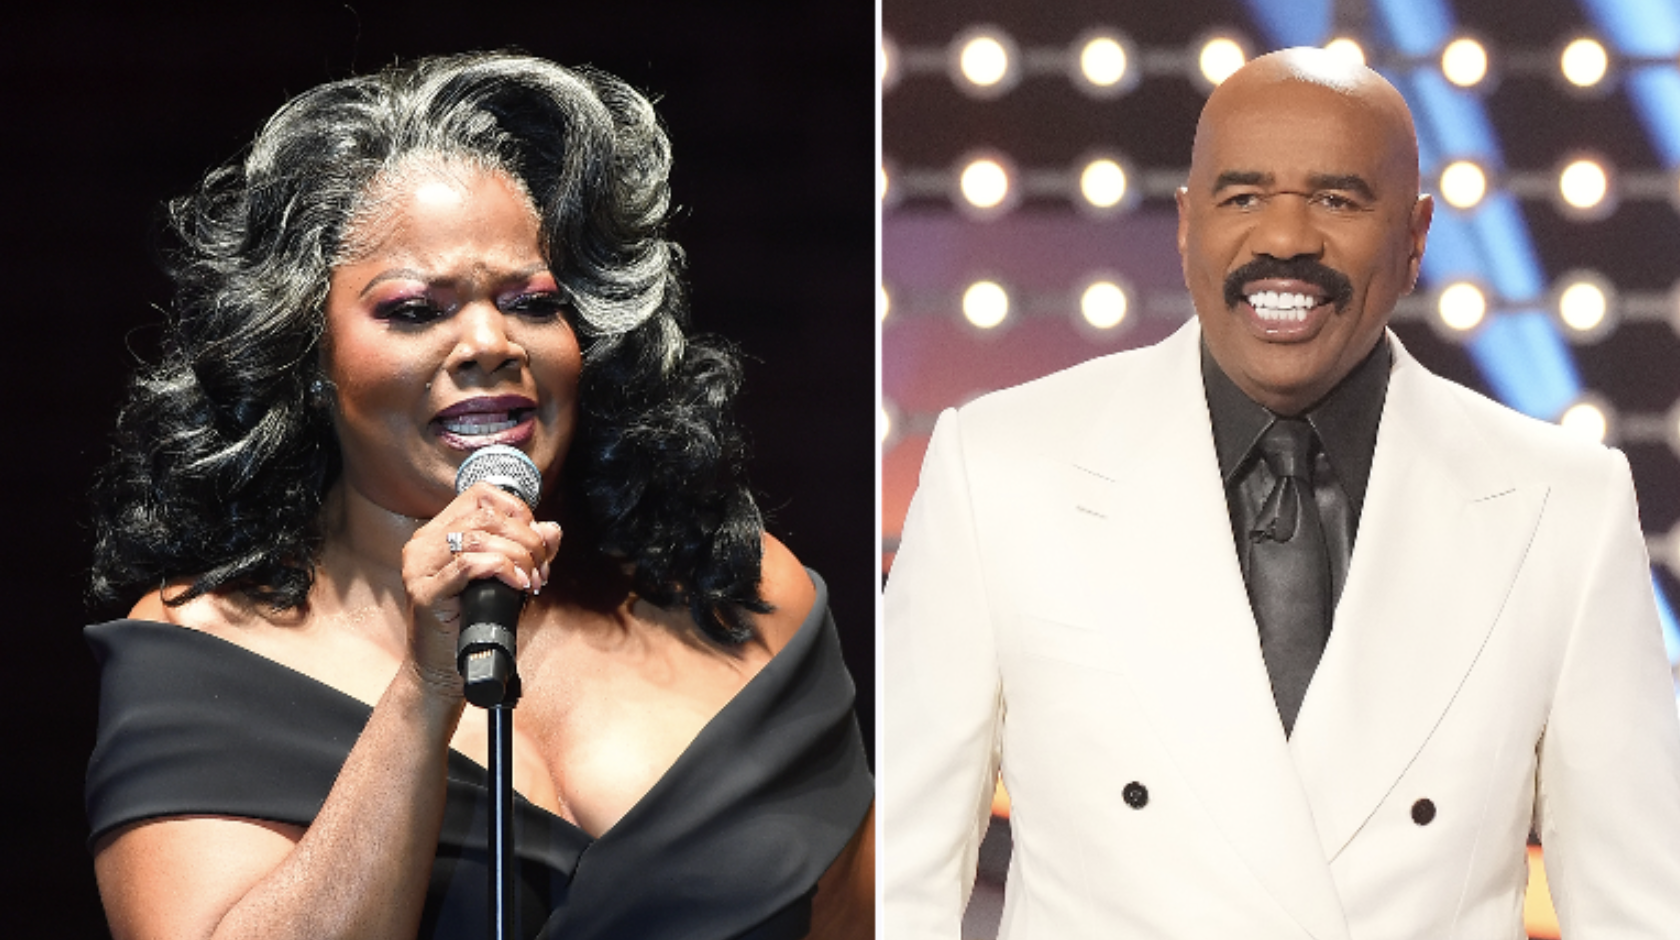 Mo'Nique Reveals Her Issues With Steve Harvey 4 Years After Her Infamous Appearance On His Talk Show